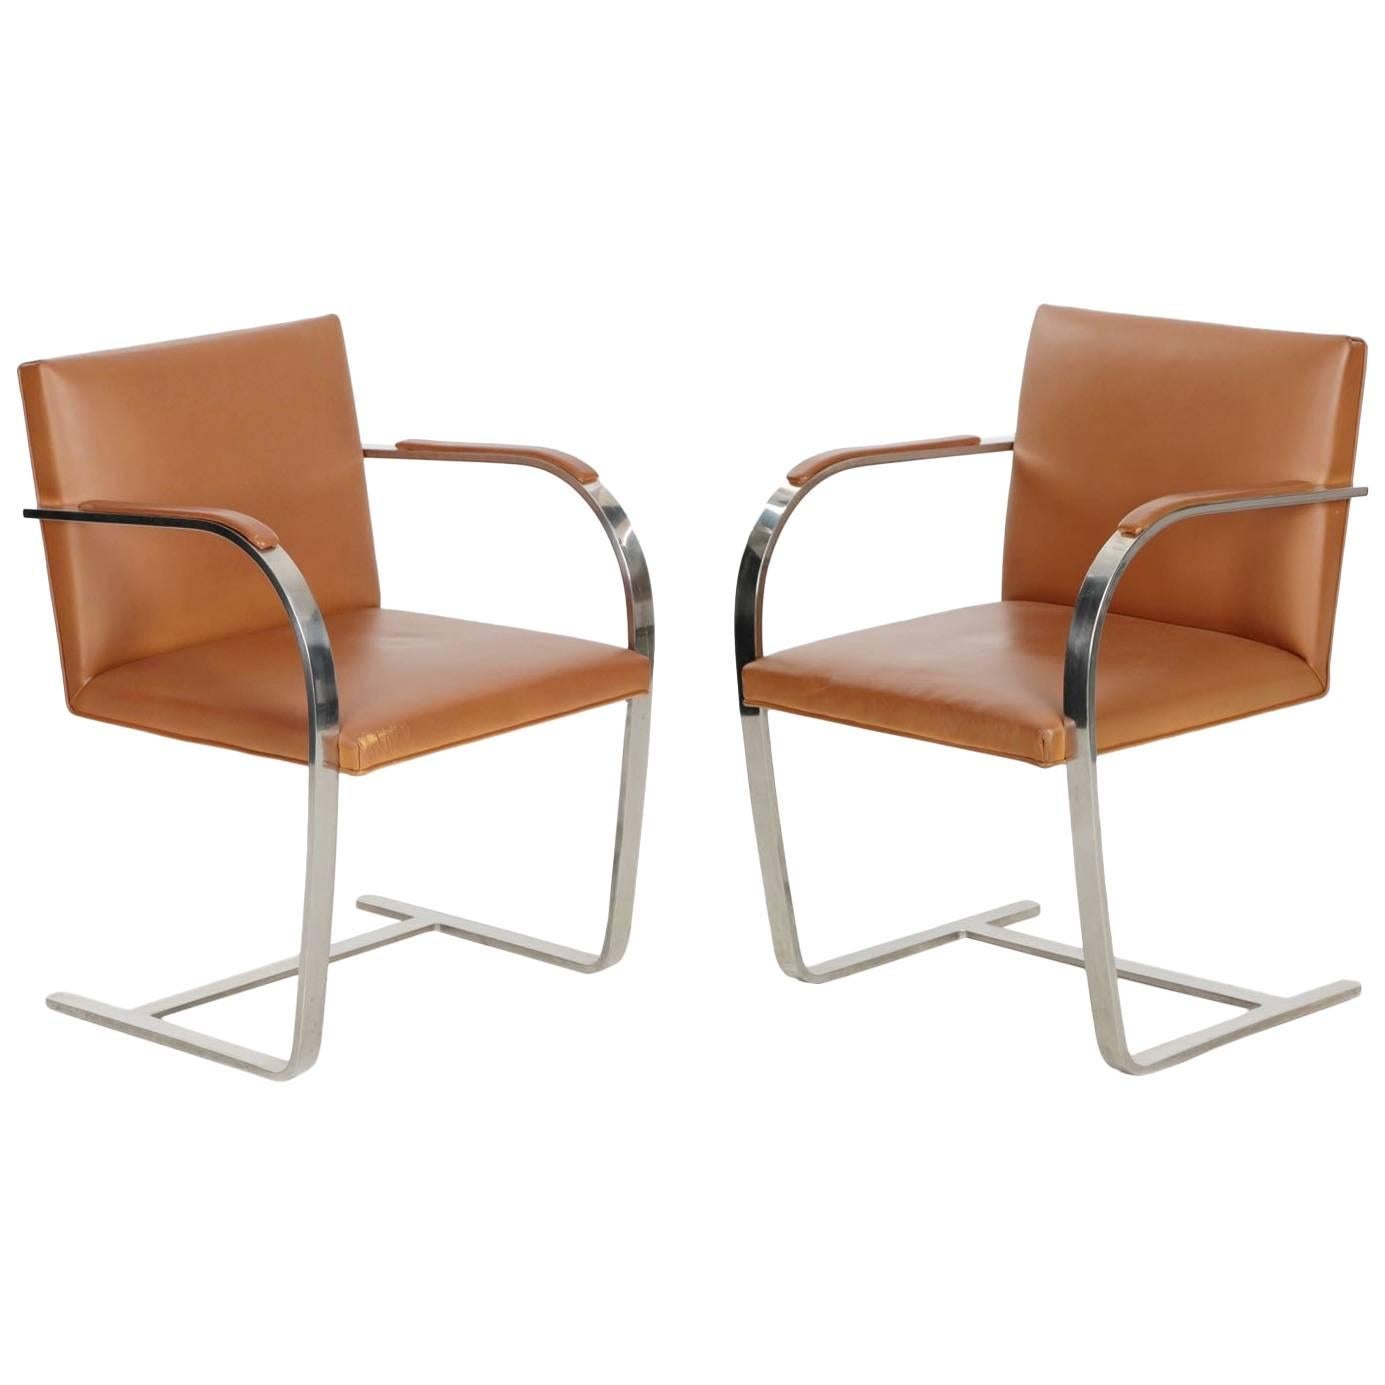 Pair of Steel and Leather BRNO Arm Chairs by Mies Van Der Rohe for Knoll